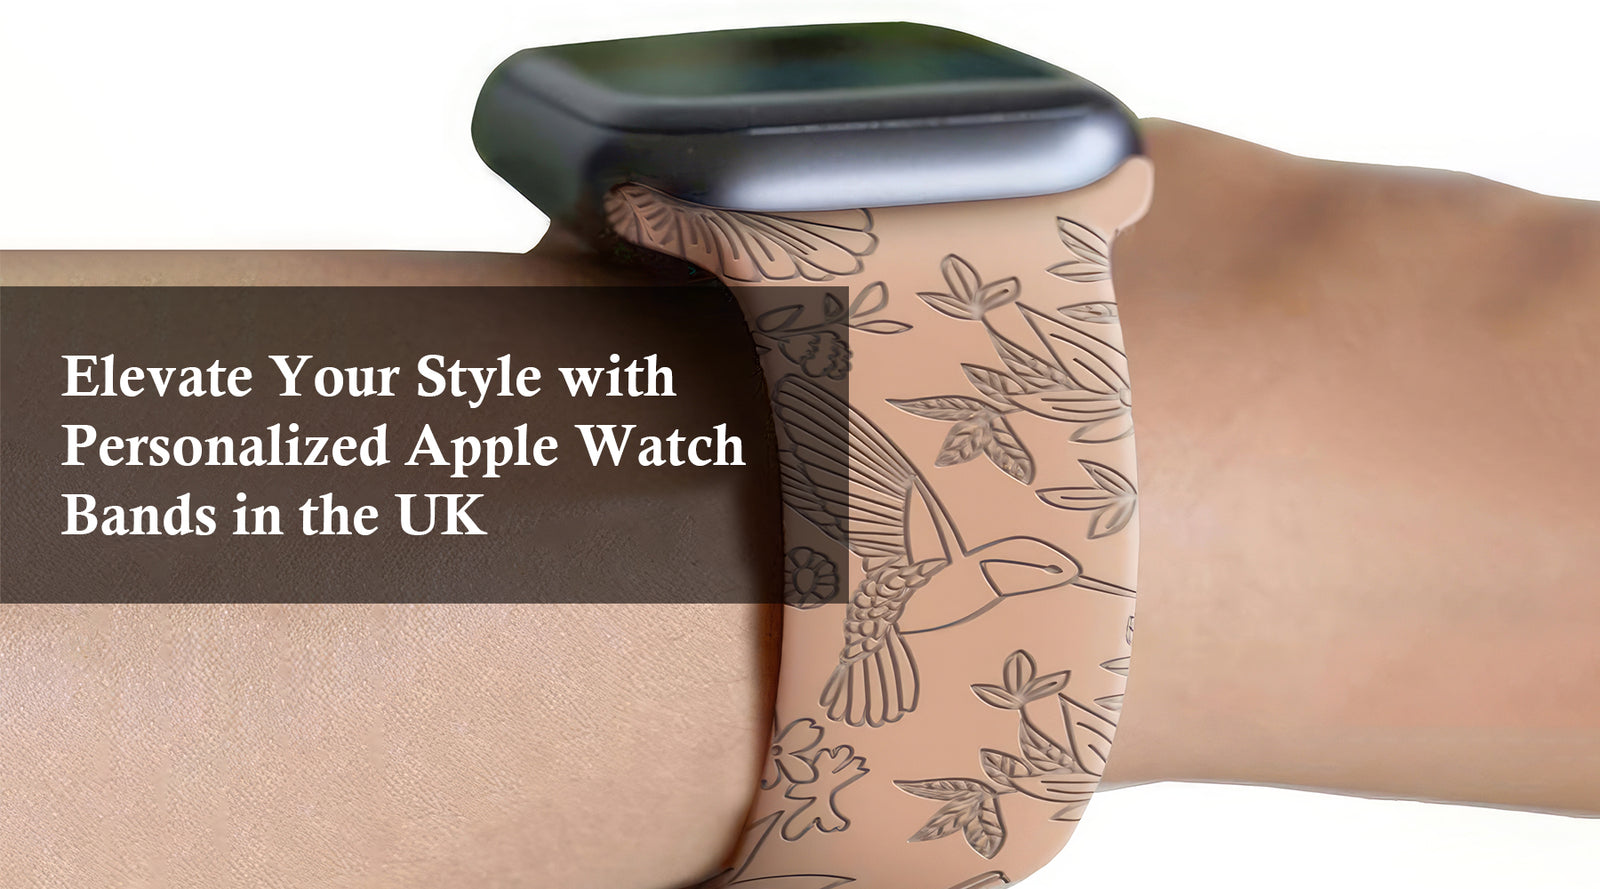 Elevate Your Style with Personalized Apple Watch Bands in the UK